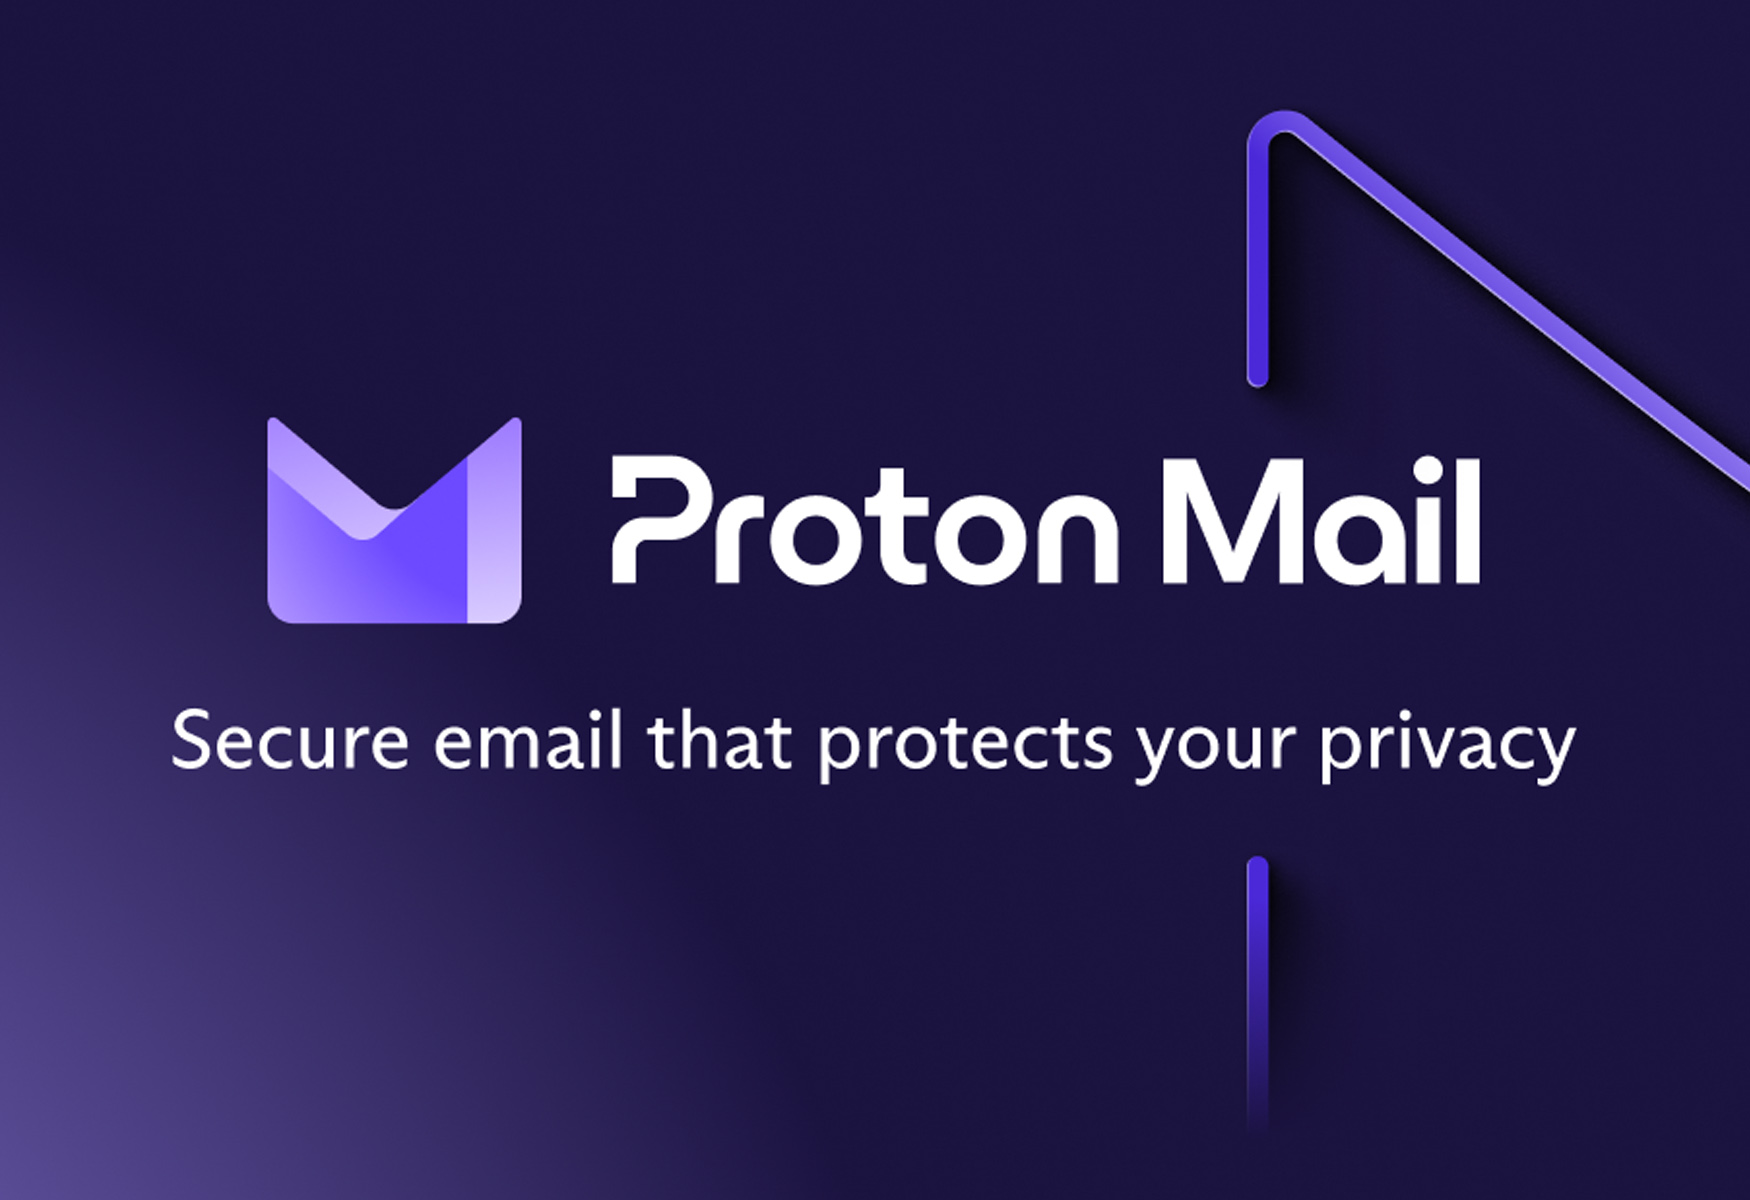 proton-mail-launches-new-desktop-app-for-enhanced-user-experience